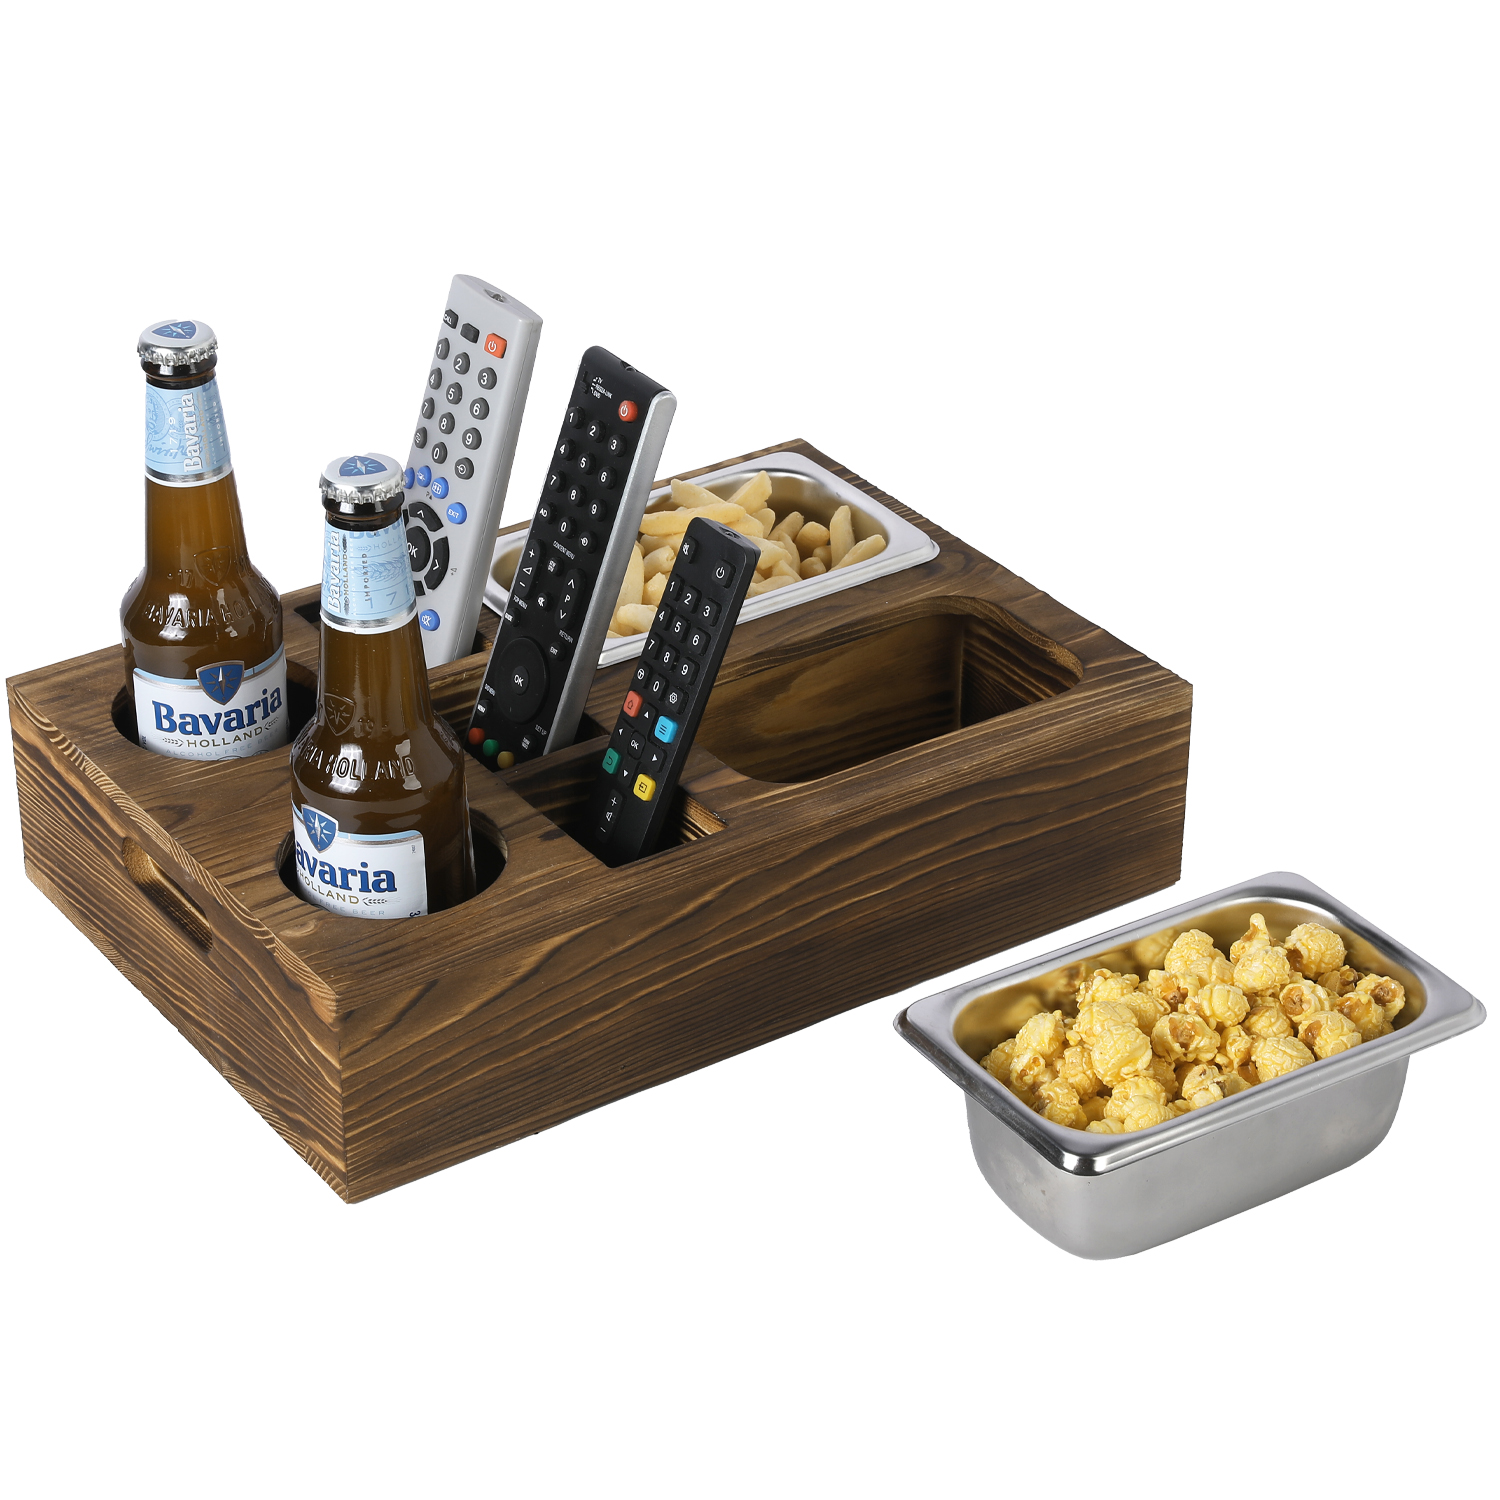 MyGift Burnt Brown Wood Sofa Couch Snacks Caddy Serving Crate Tray with 2 Cup Holders and 3 Remote Control Slots